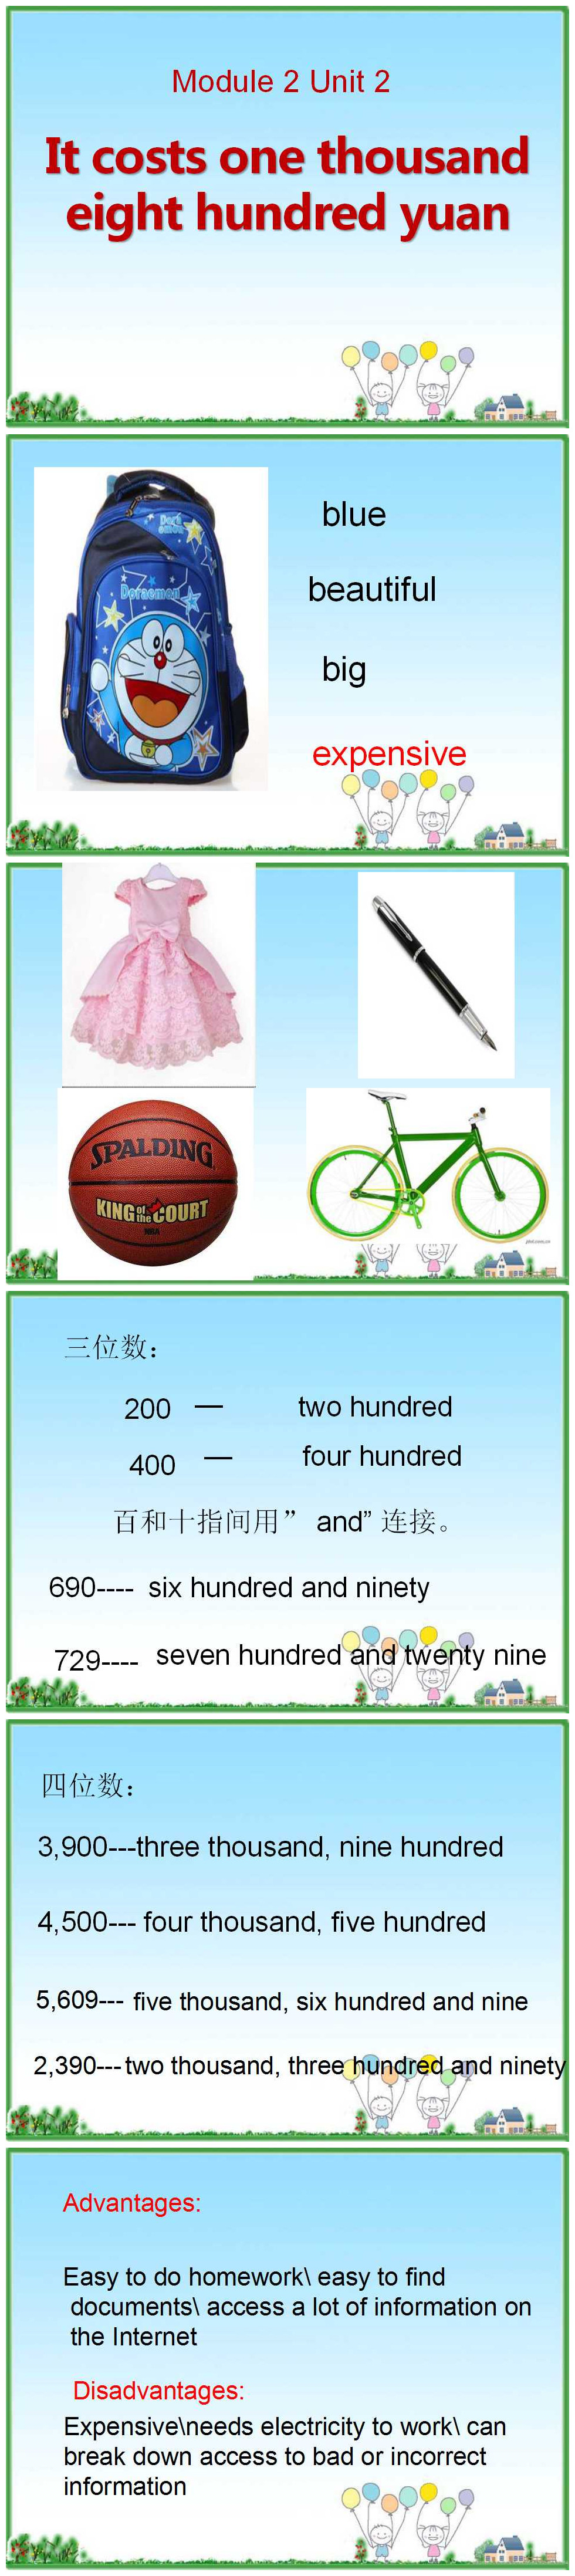 《It costs one thousand eight hundred yuan》PPT课件PPT课件下载